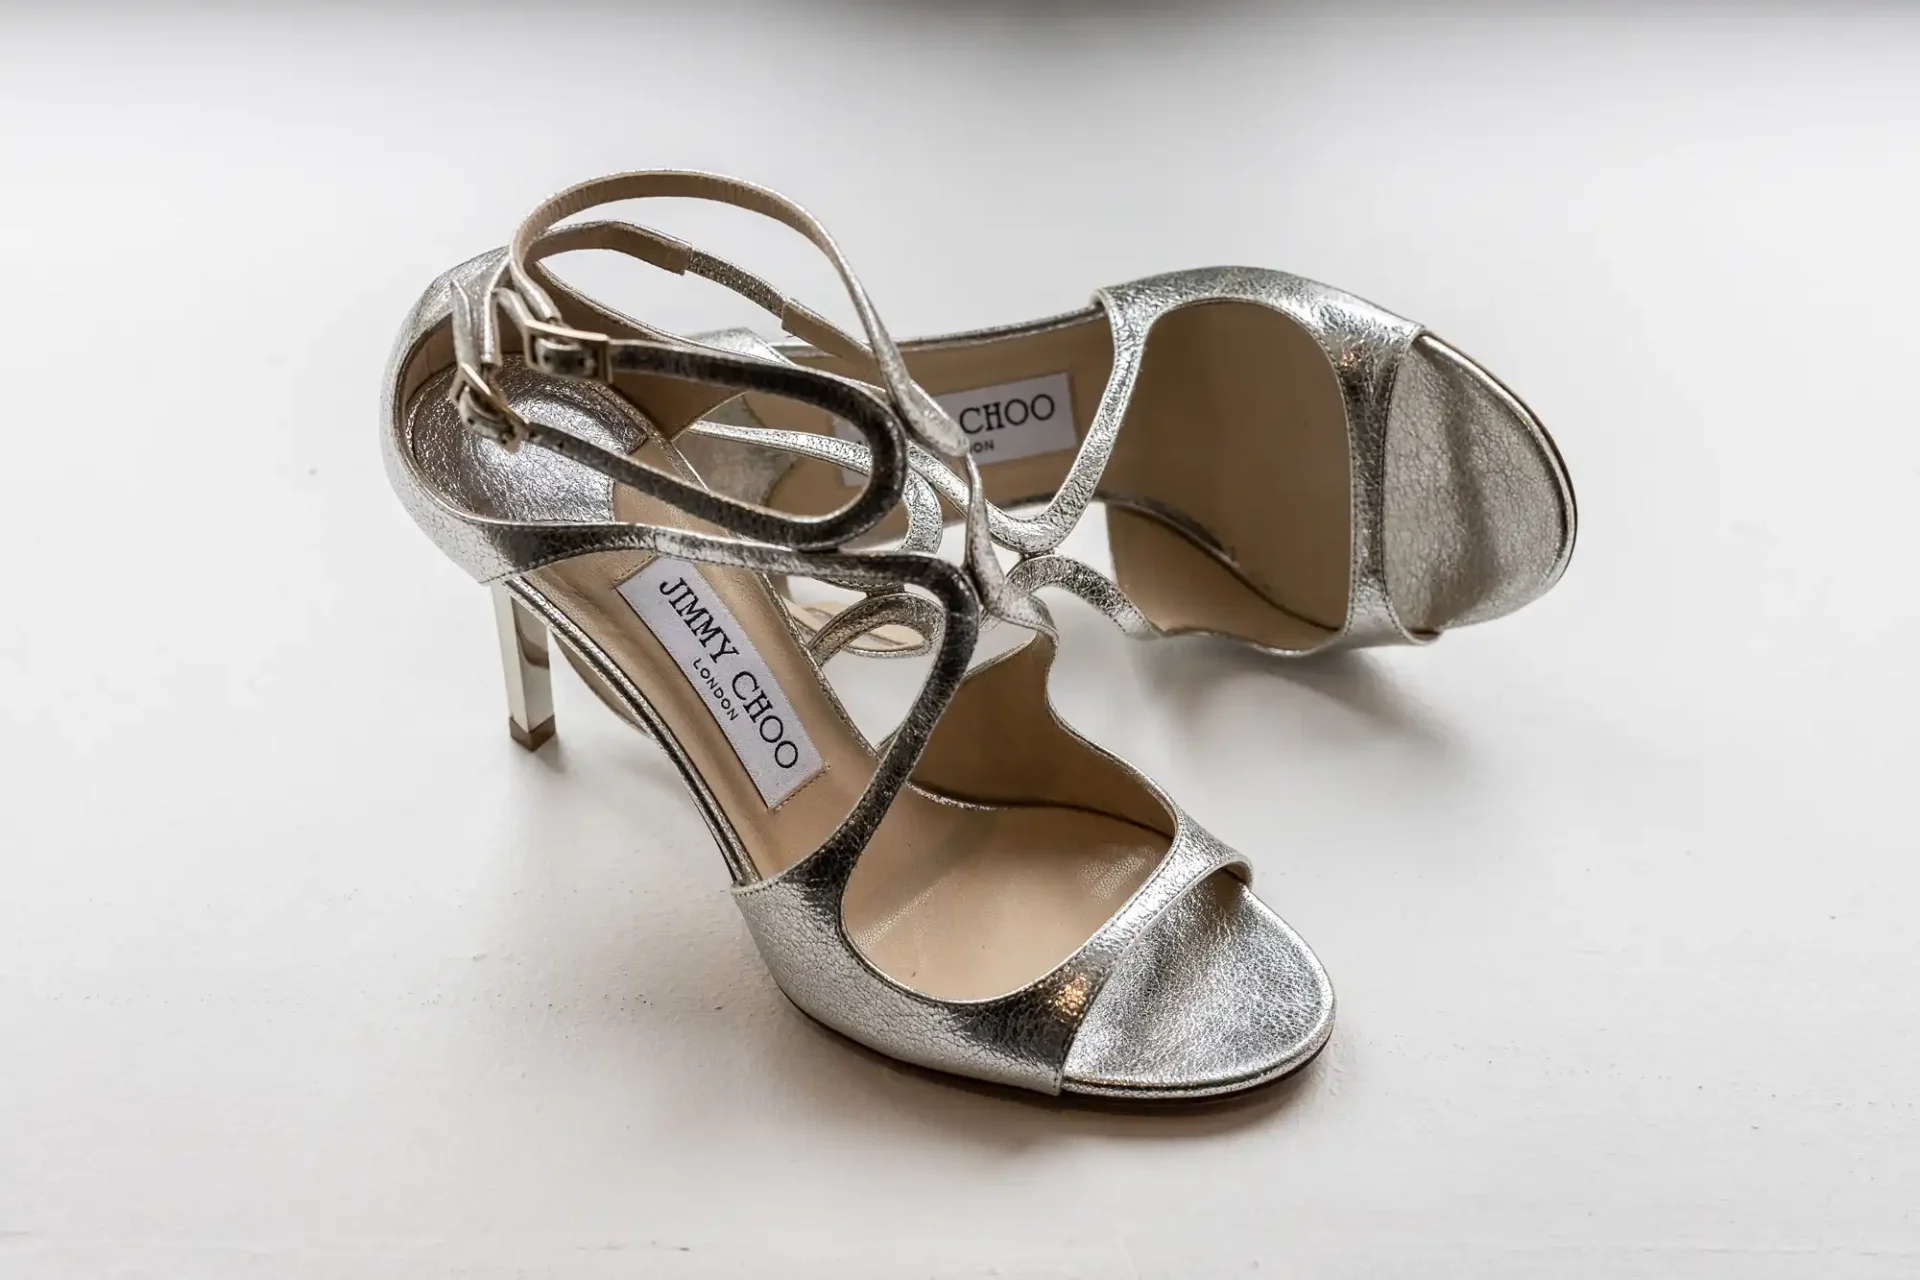 A pair of silver jimmy choo high heels on a white surface.